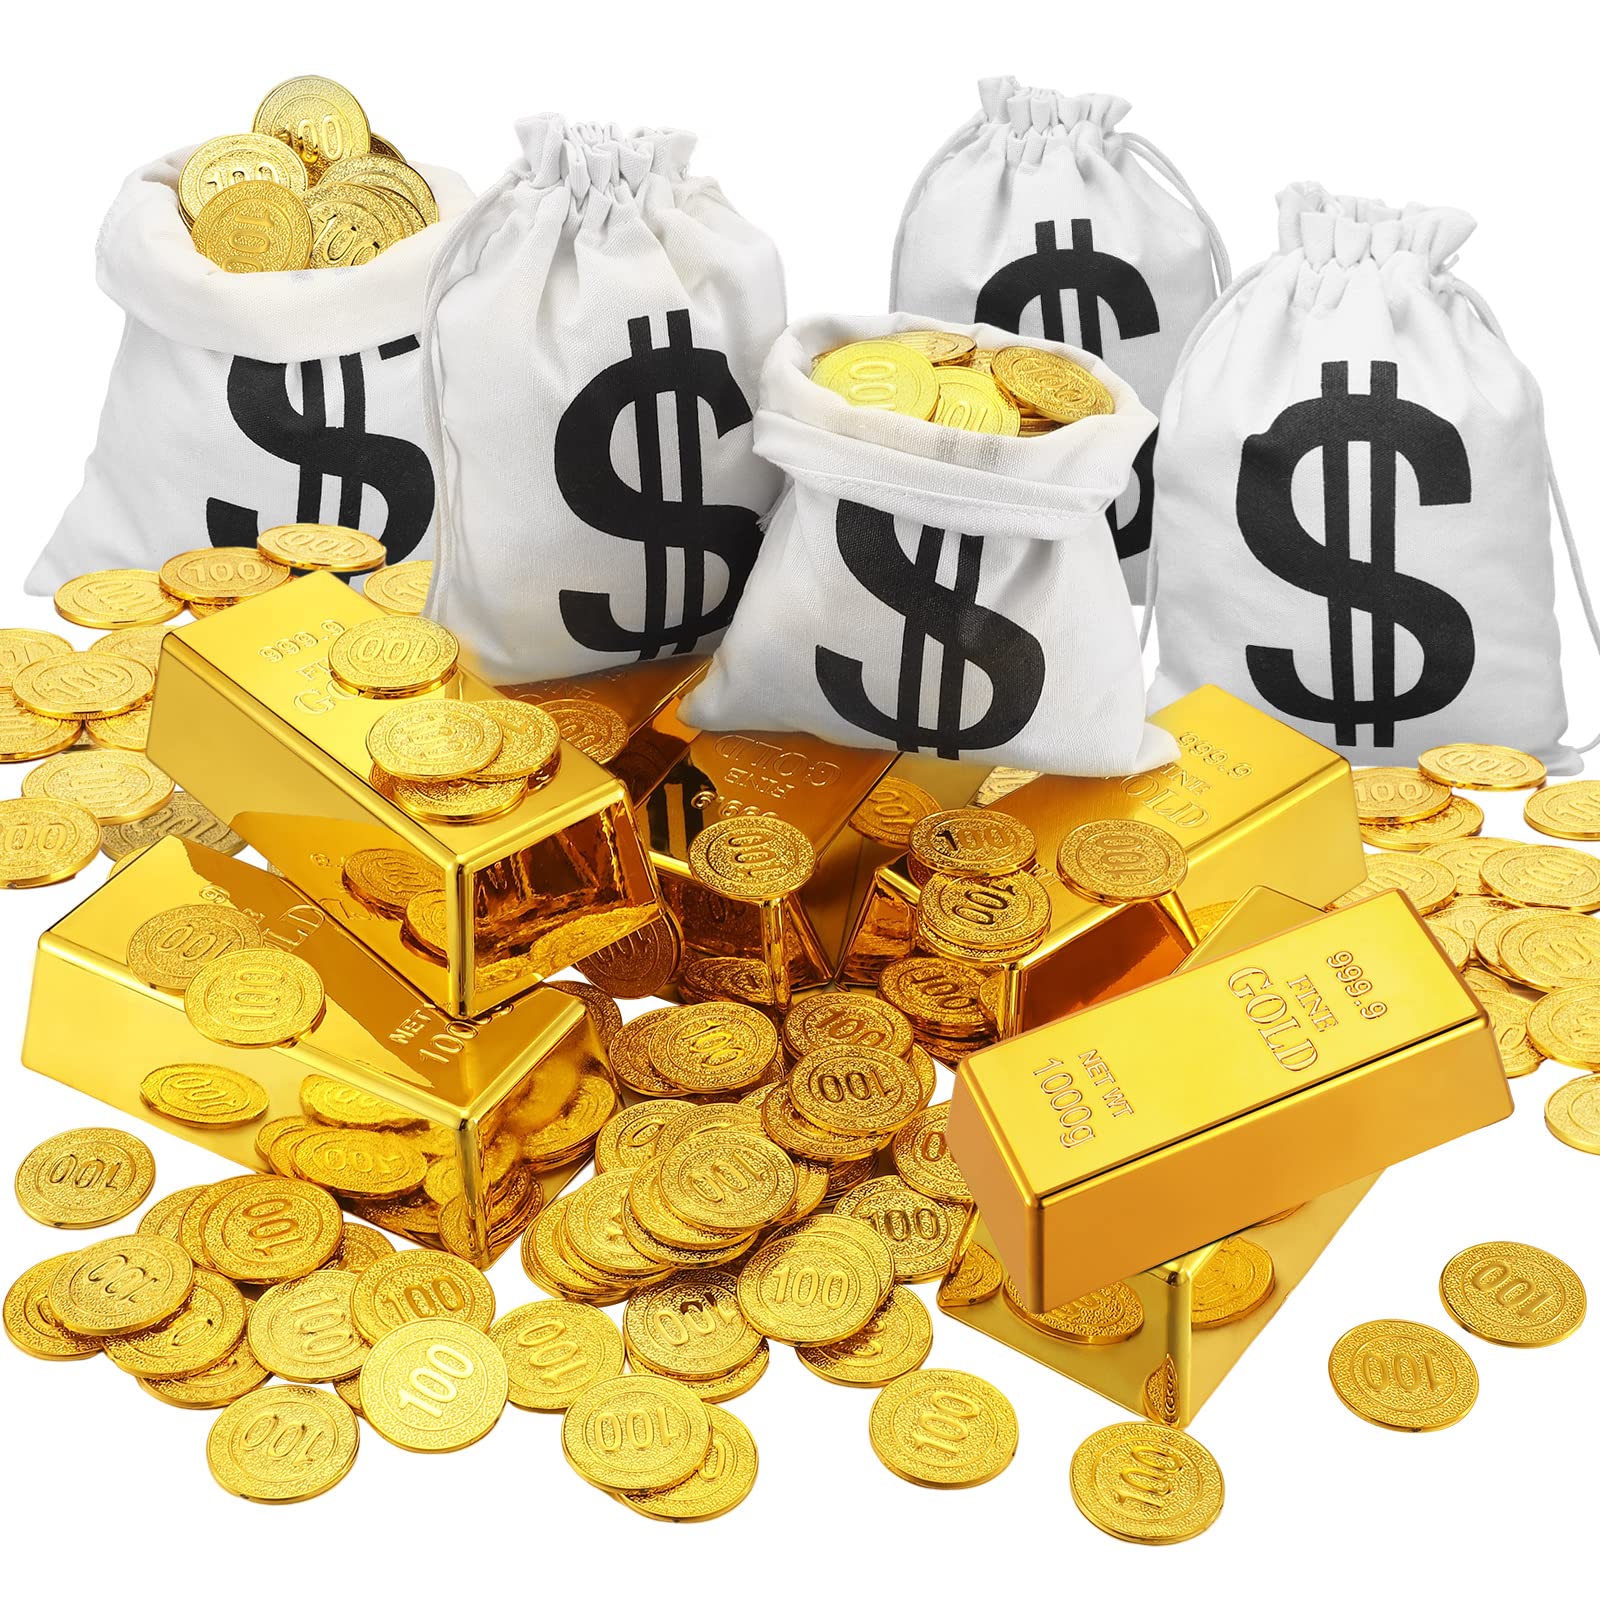 A stack of gold bars or a pile of gold coins